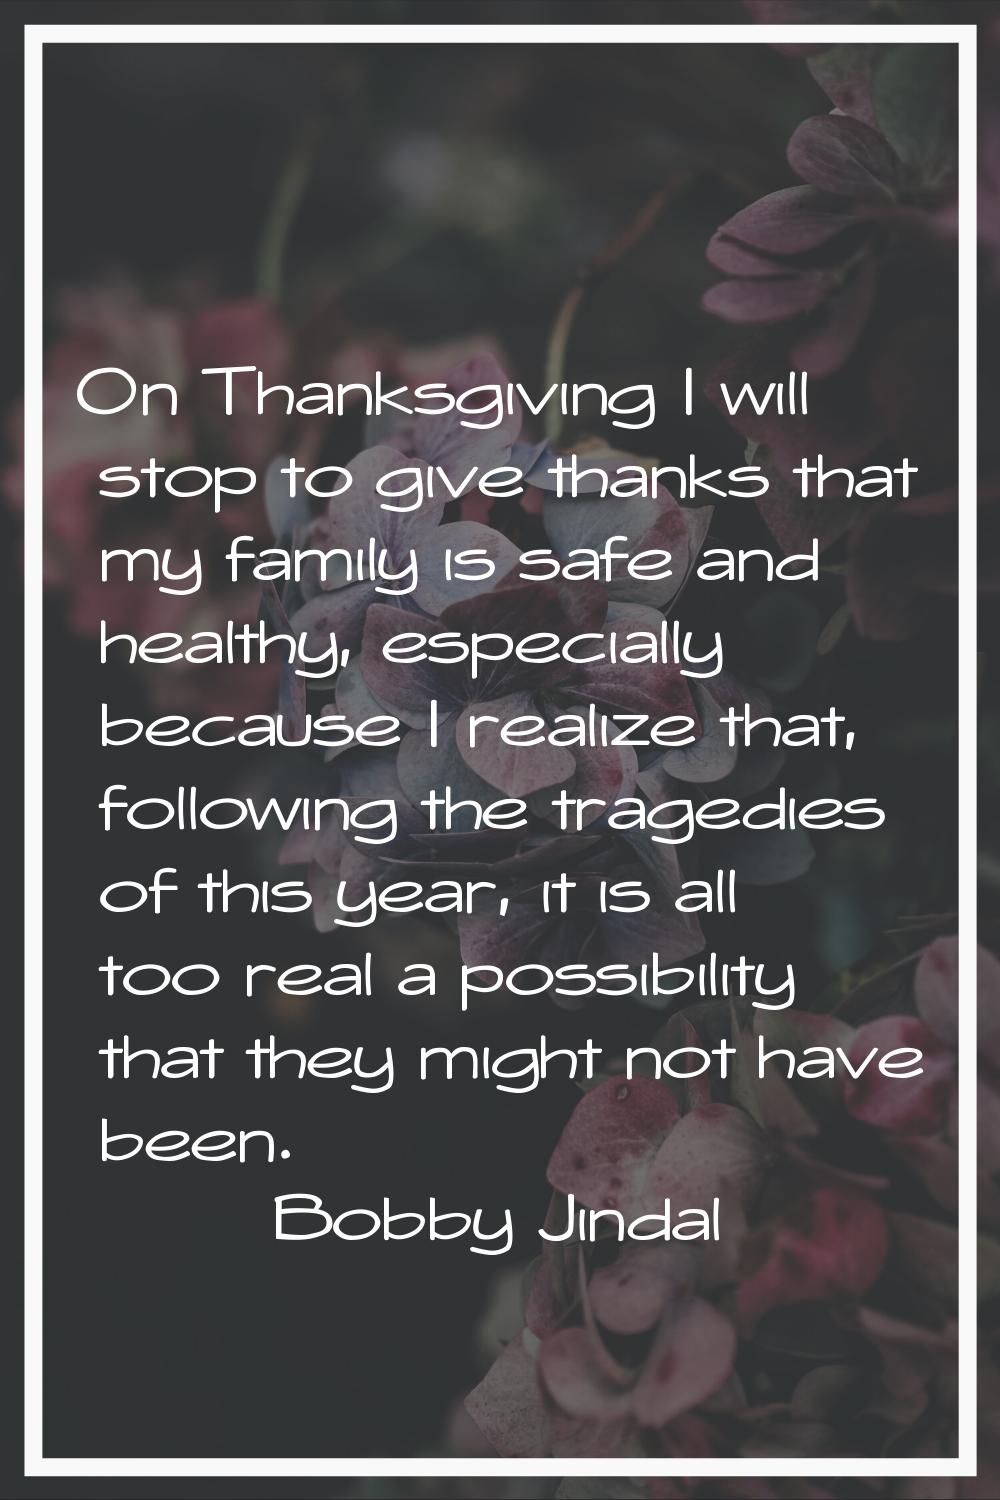 On Thanksgiving I will stop to give thanks that my family is safe and healthy, especially because I